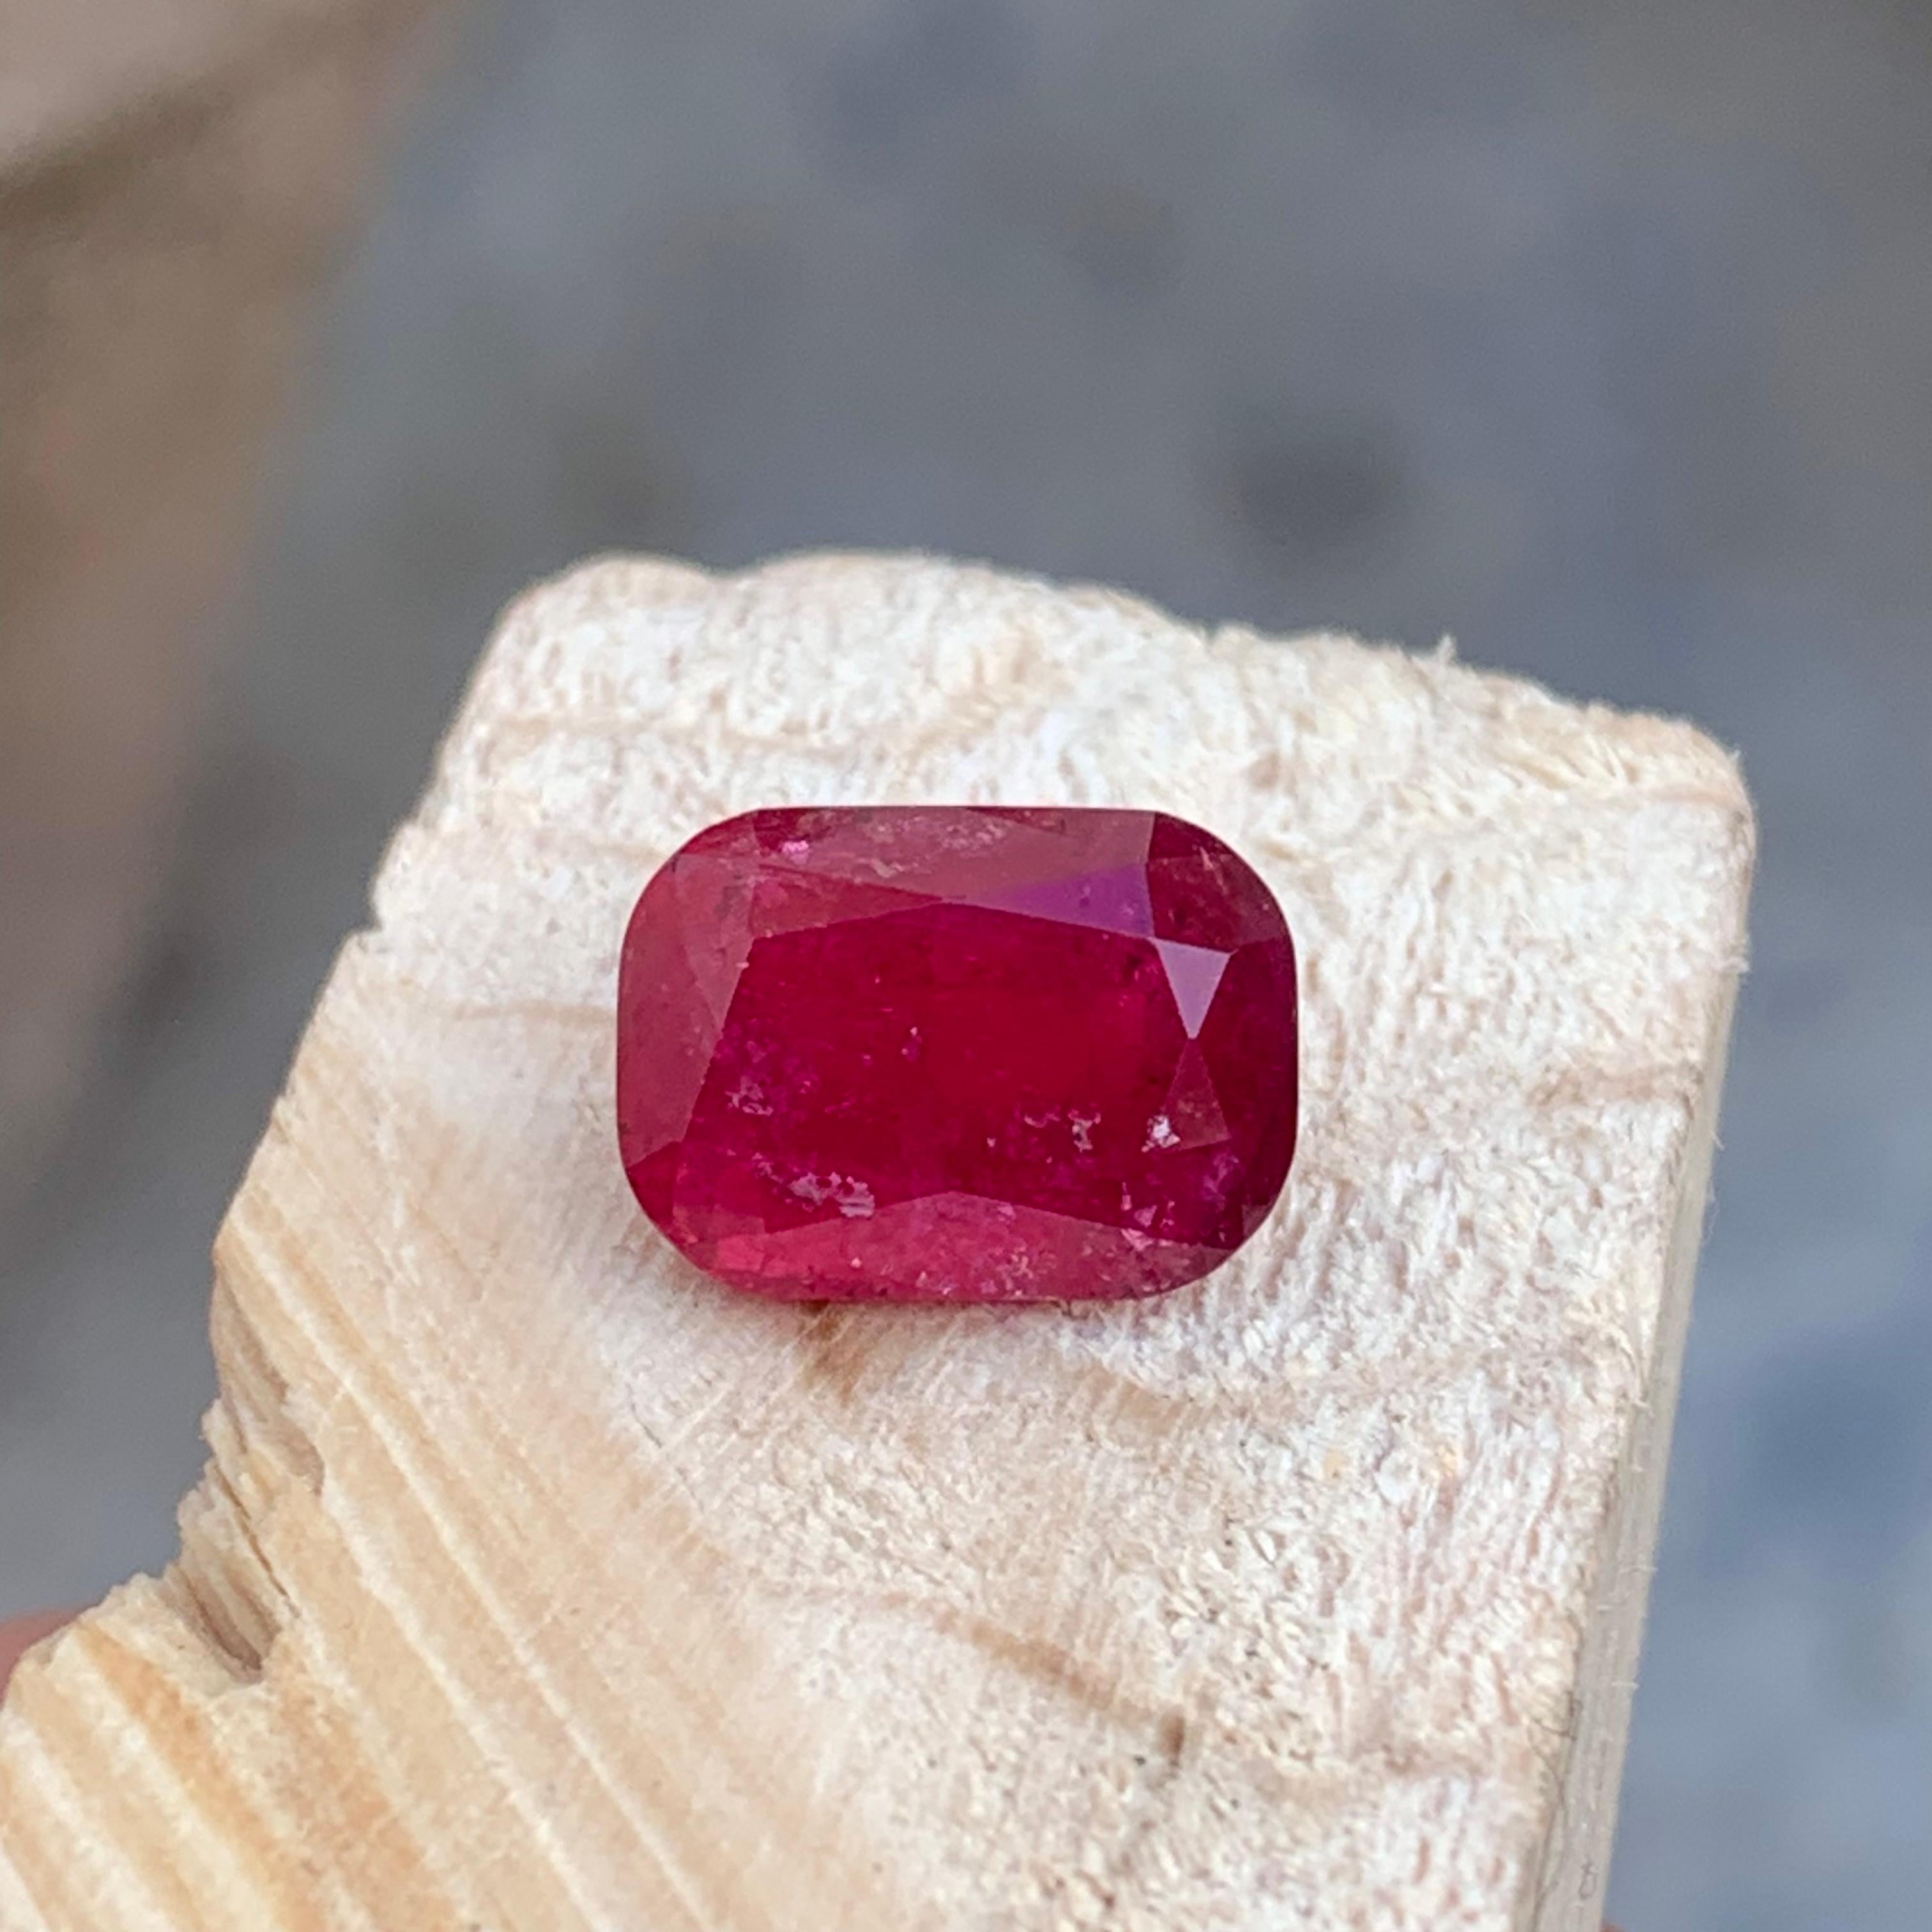 Gemstone Type :  Rubellite Tourmaline
Weight : 5.50 Carats
Dimensions : 12.3x8.9x6.6 Mm
Origin : Africa 
Clarity :  Inclusion/ Included 
Shape: Cushion
Color: Pink Red
Certificate: On Demand
The rubellite is a transparent gemstone from the colorful